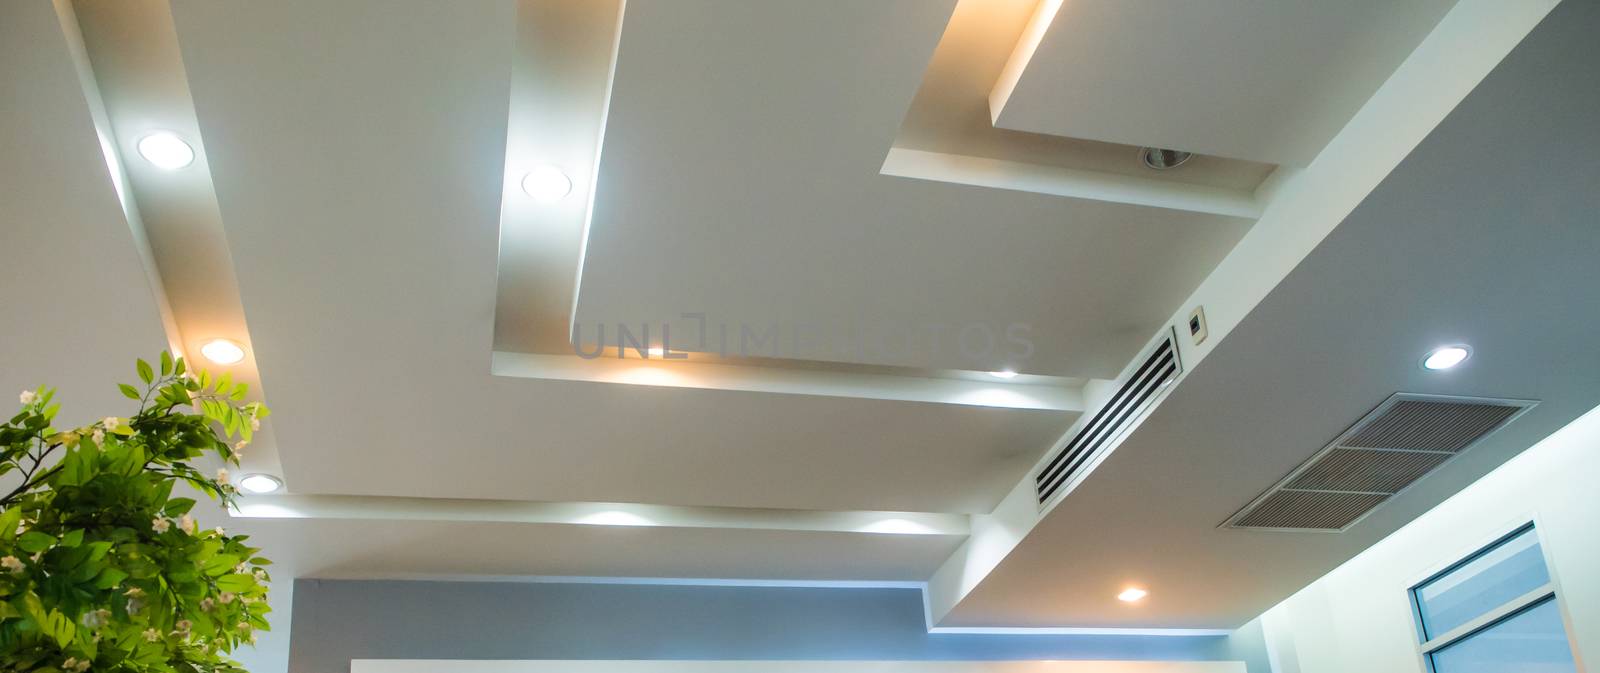 Lighting on the modern office ceiling by Satakorn